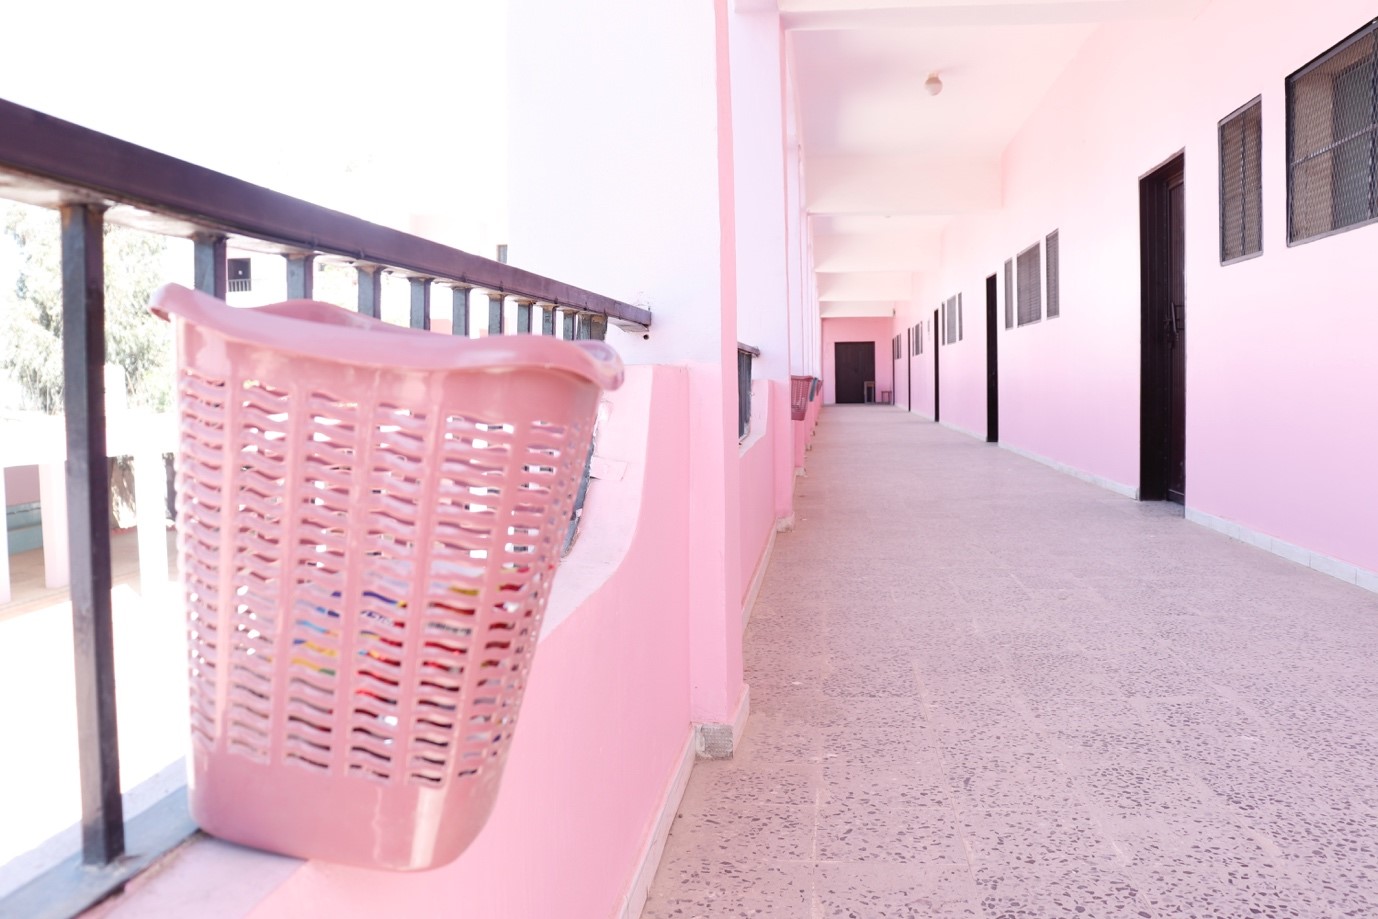 A pink hallway with a basket on the side,